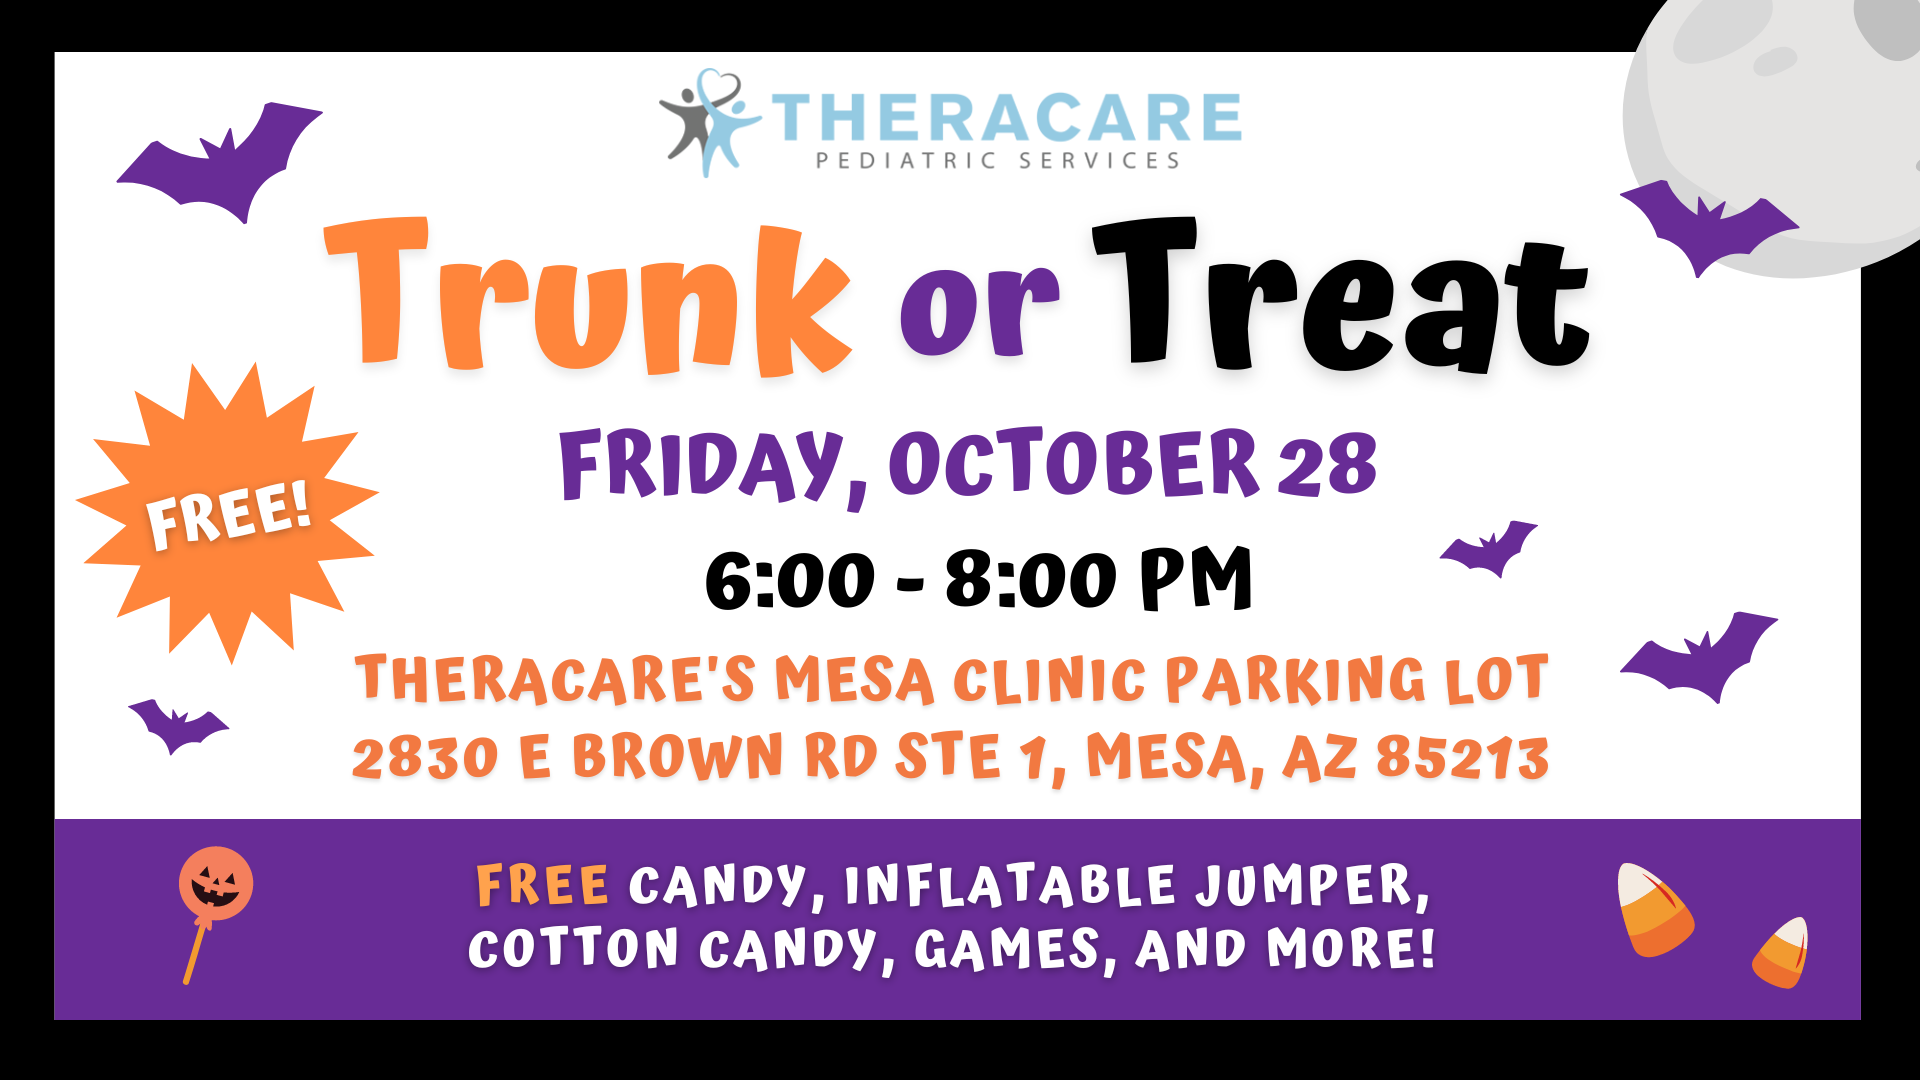 Copy of Theracare Trunk or Treat Instagram Post Square Facebook Event Cover